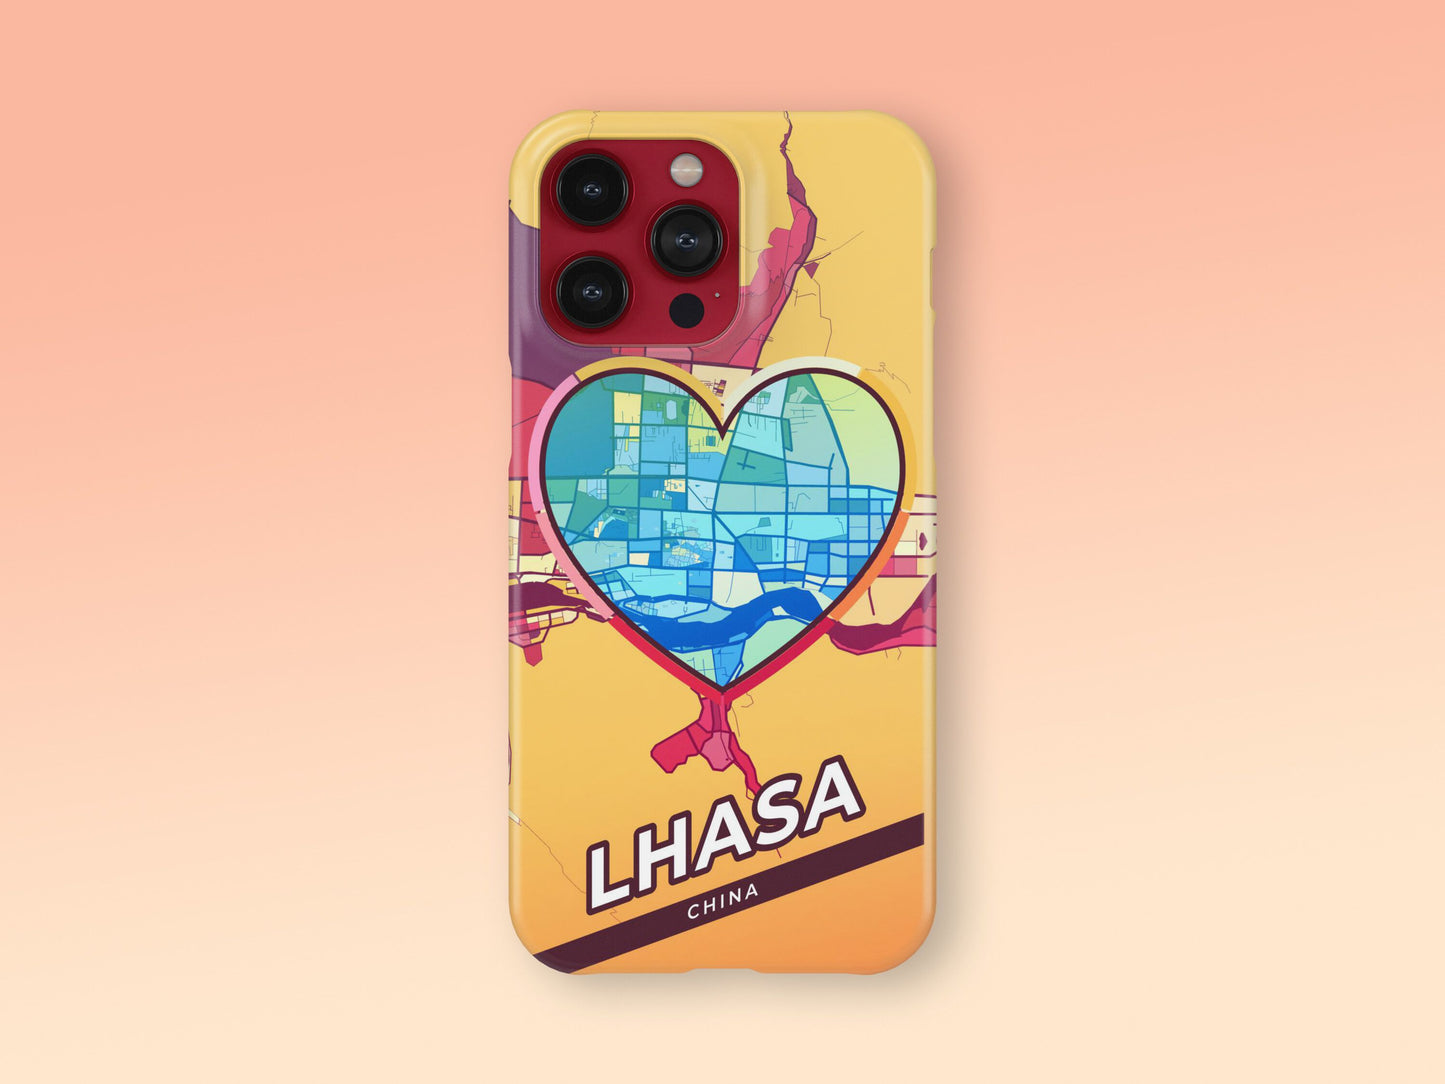 Lhasa China slim phone case with colorful icon. Birthday, wedding or housewarming gift. Couple match cases. 2